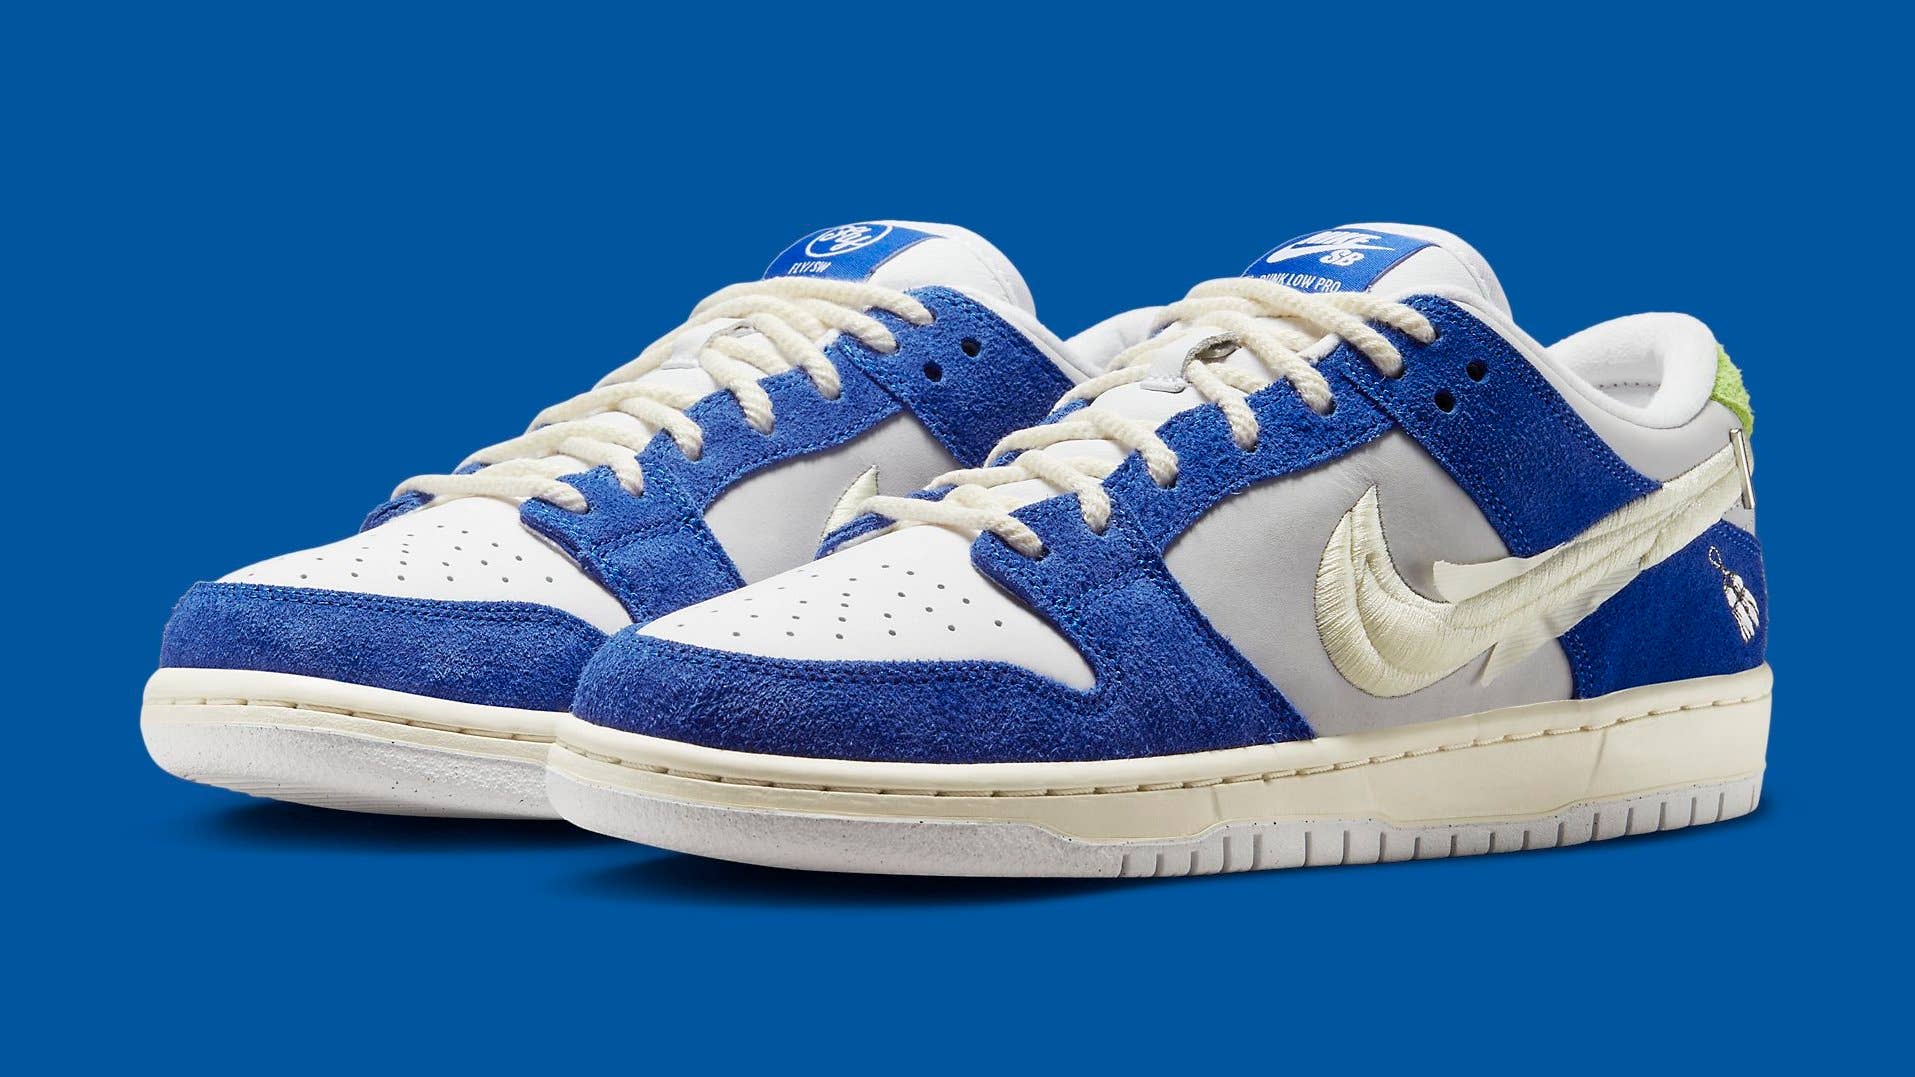 chocola Maxim Instrument Fly Streetwear's Nike SB Dunk Collab Drops This Month | Complex